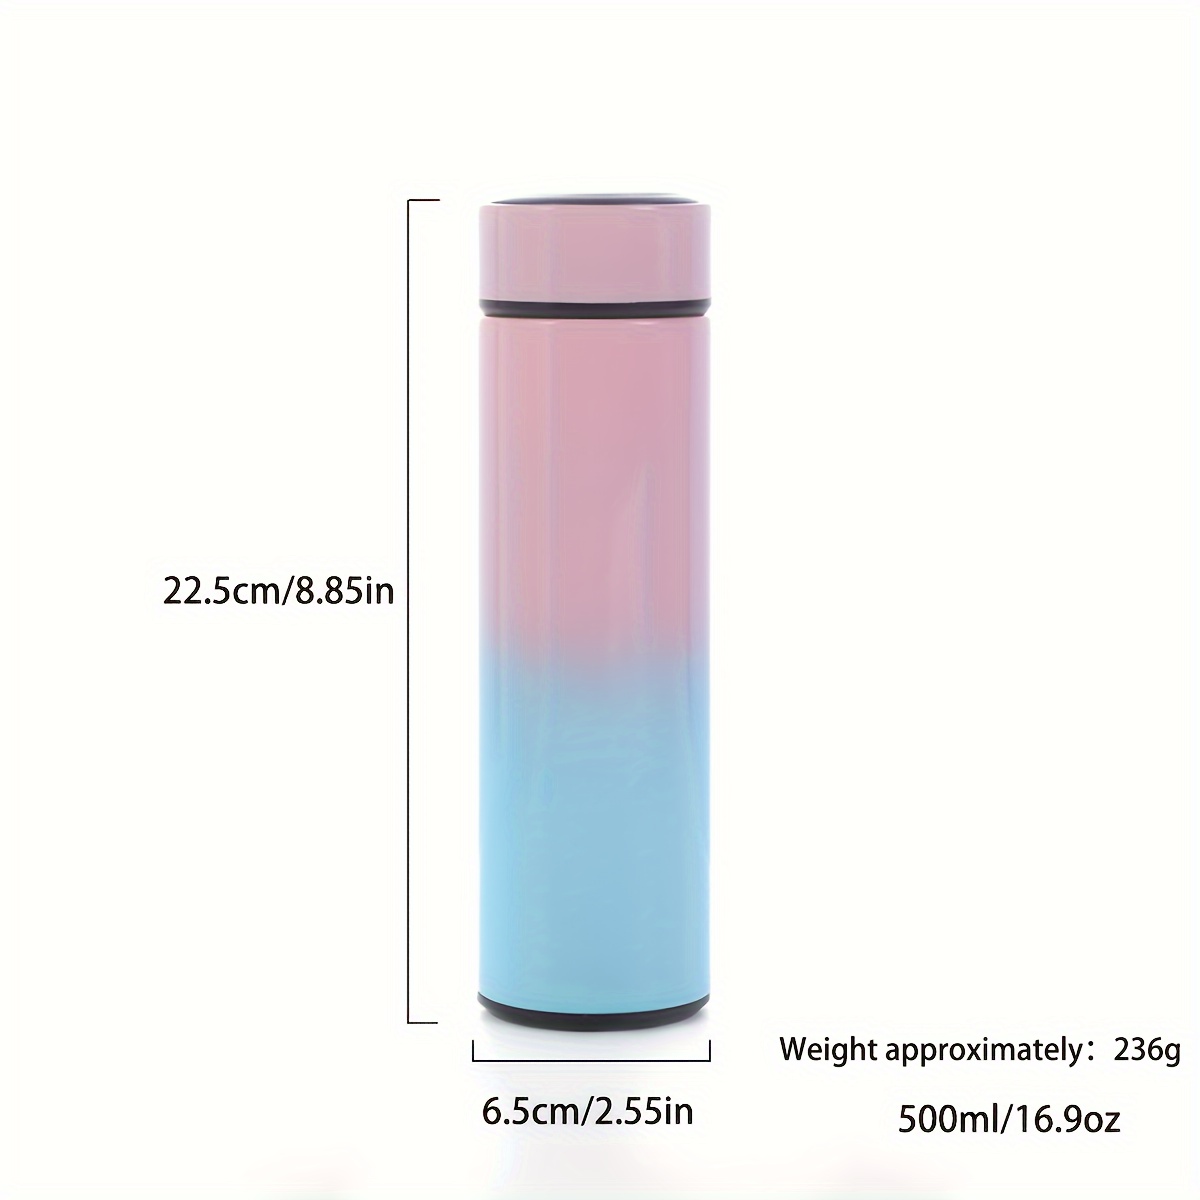 water bottle buy 2 get free gift Hot Cold Water Bottle With LED buy  Temperture Smart Thermos Stainless Steel Mug